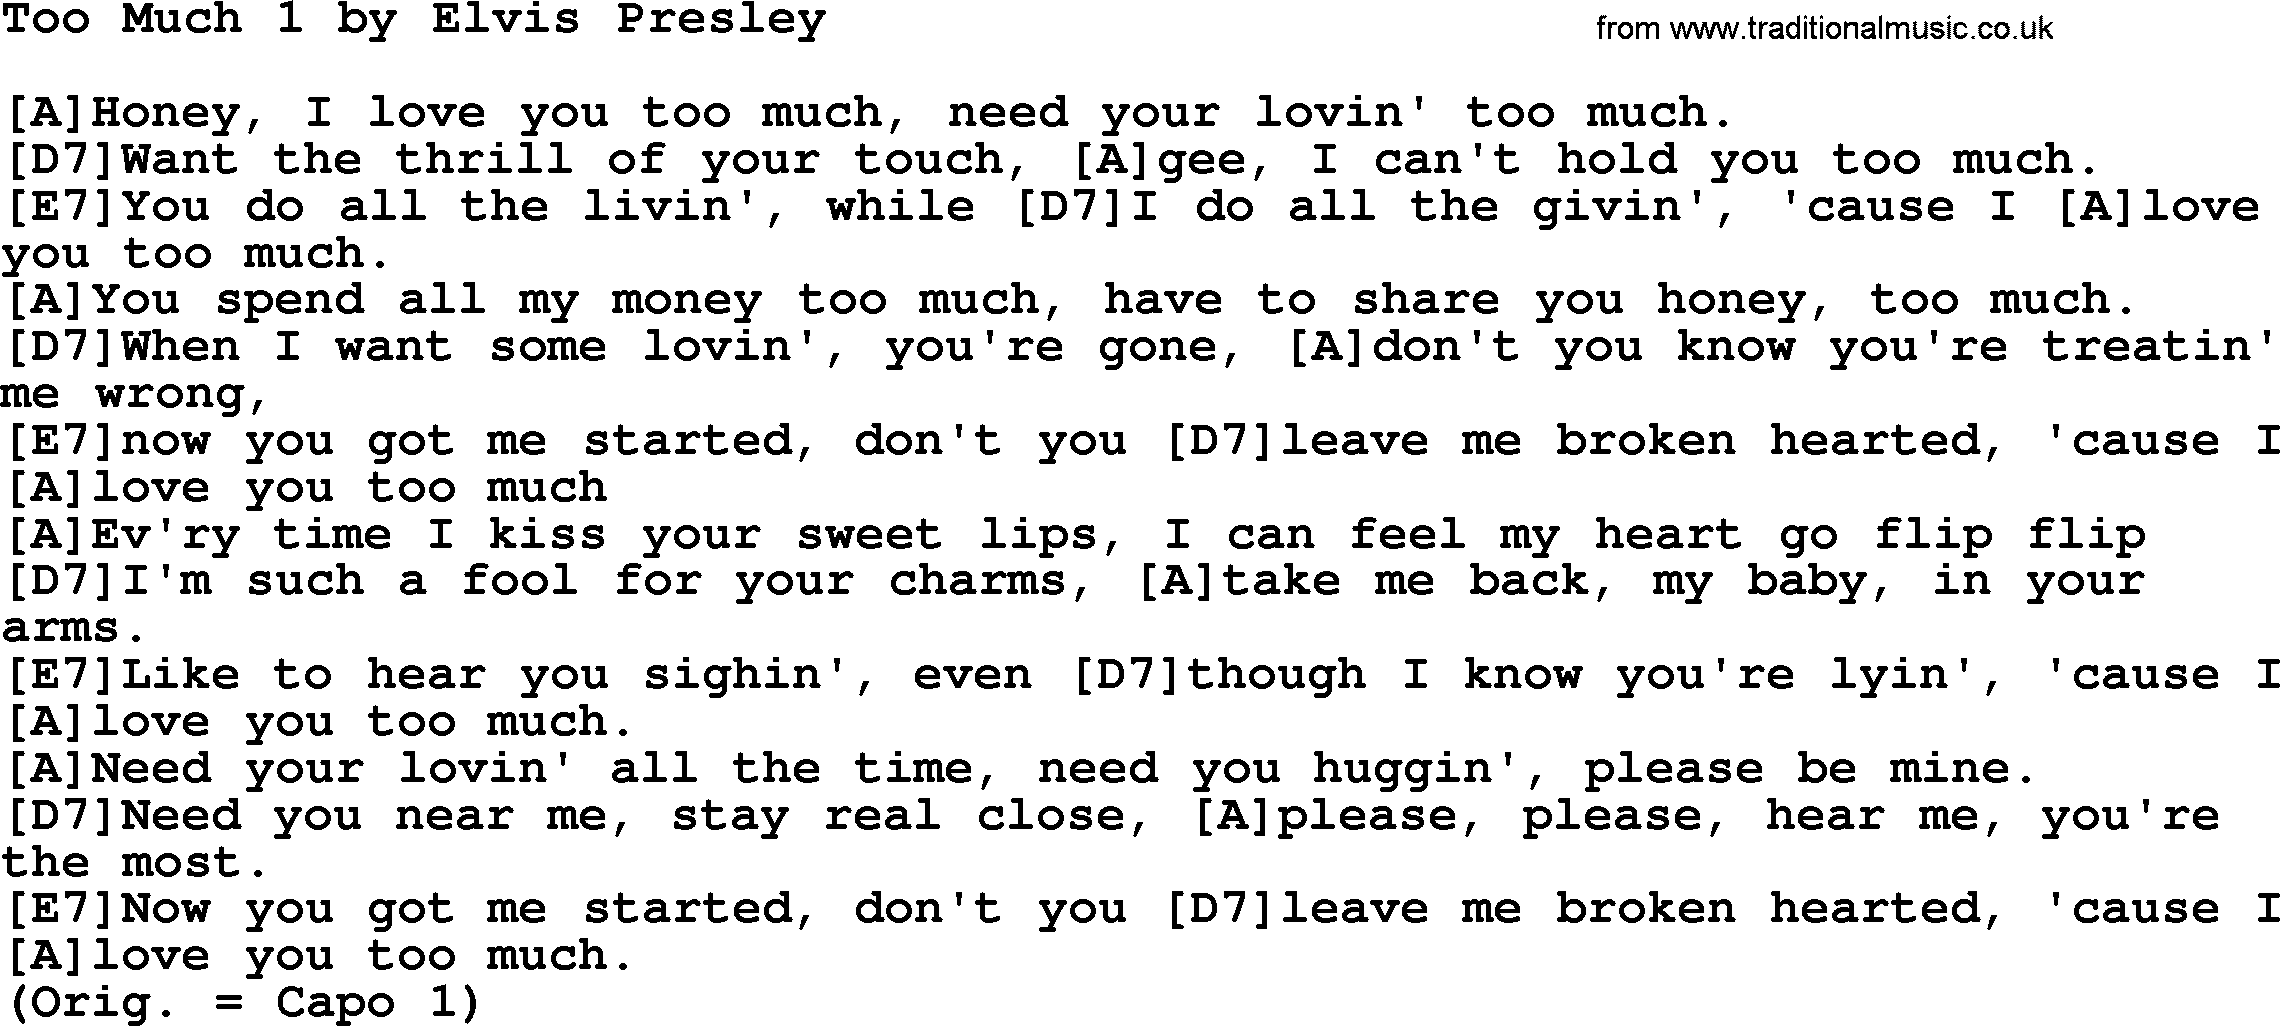 Elvis Presley song: Too Much 1, lyrics and chords